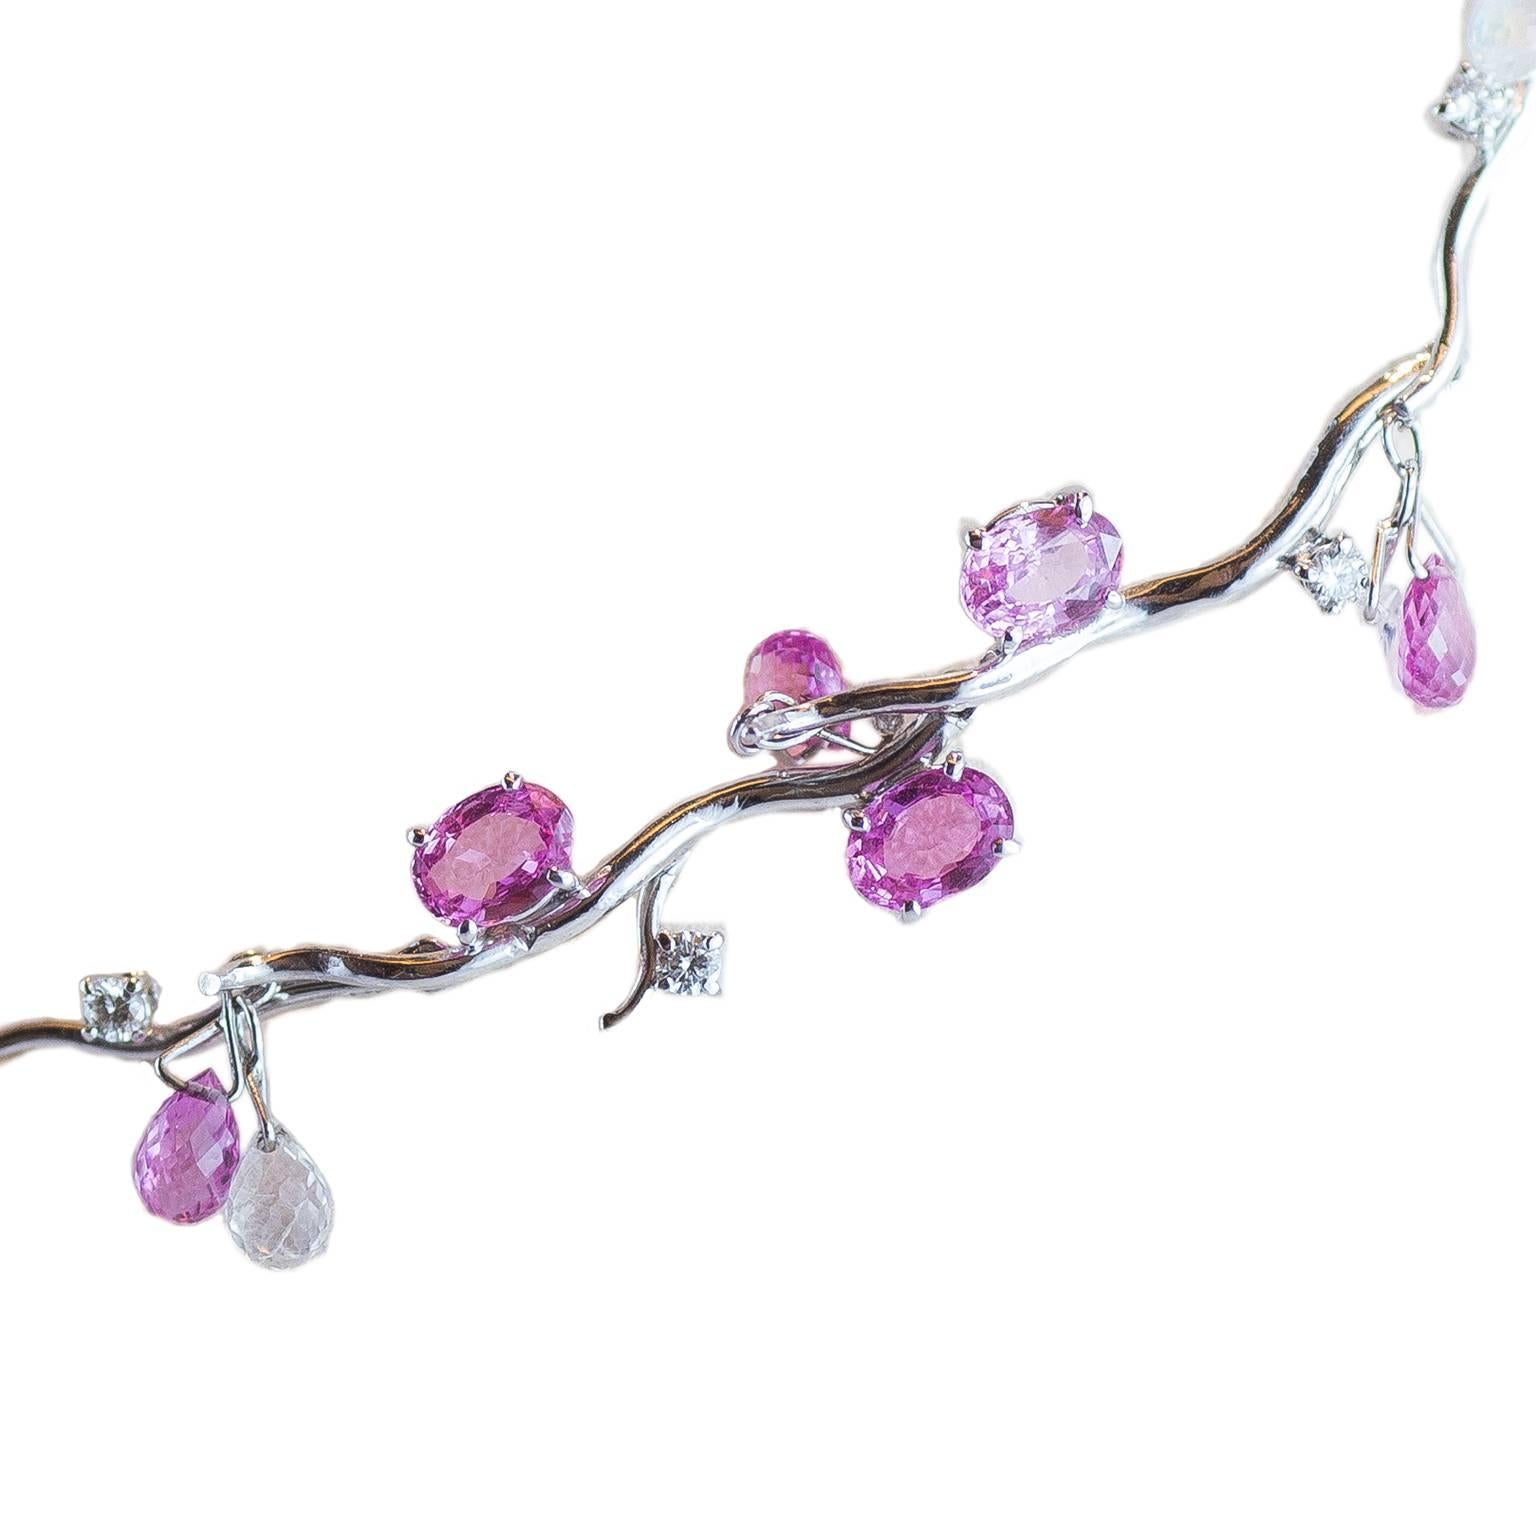 Handmade one of a kind necklace manufactured by Fratelli Piccini's goldsmiths in the ancient workshop on the Ponte Vecchio. The necklace represents a 33 grams 18KT white gold branch with 26.27 ct oval and briolette cut pink sapphire, 0.70 ct